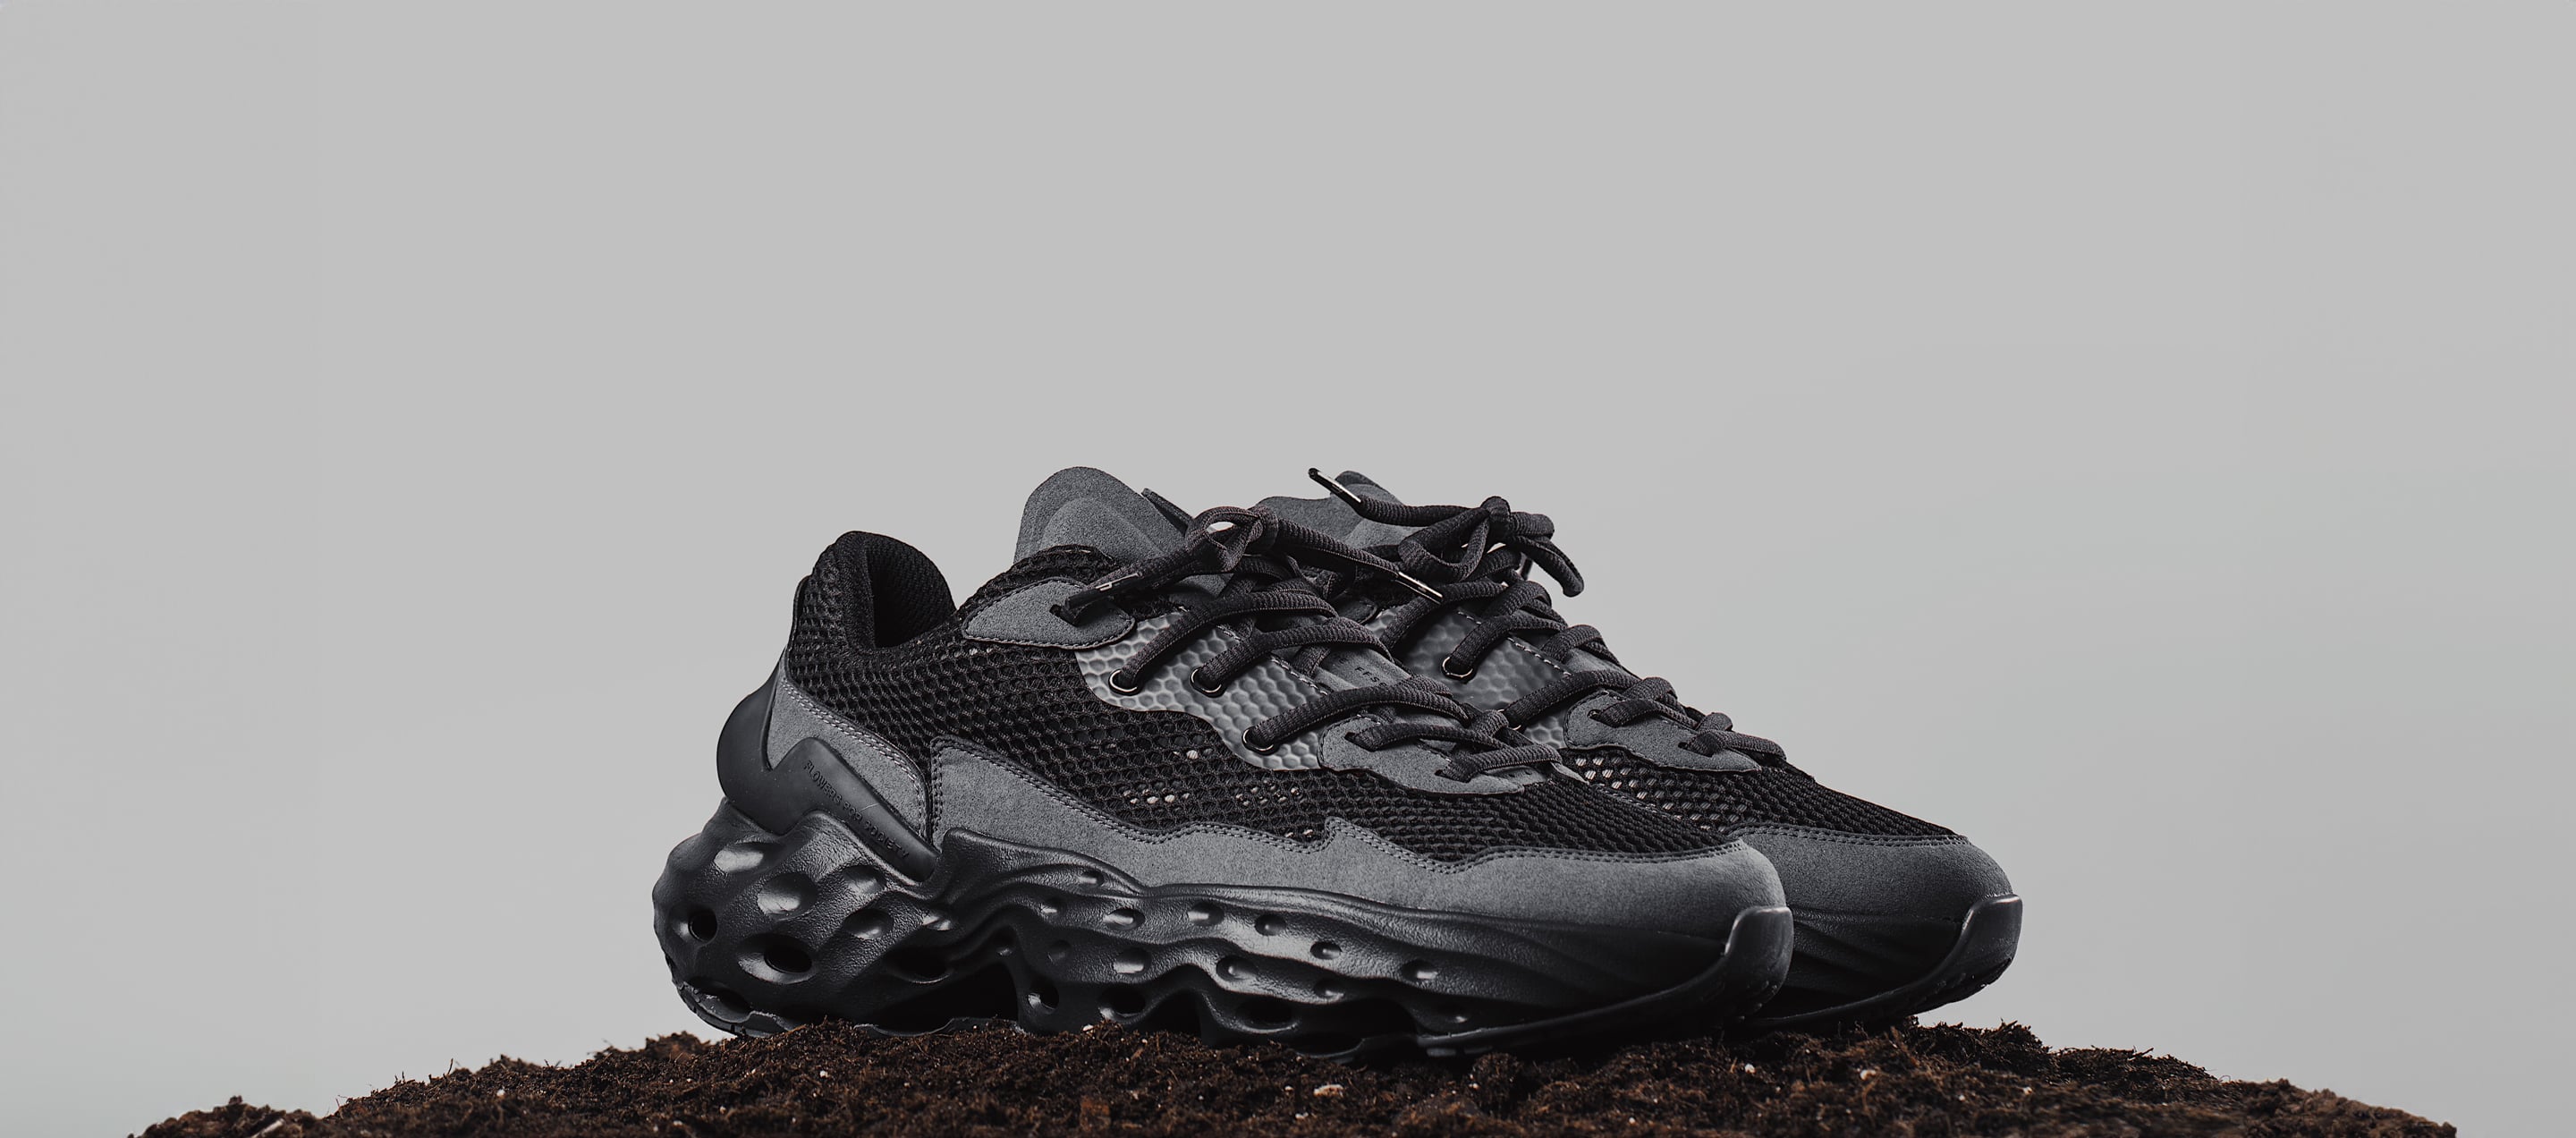 A campaign picture of the shoe Seed.One in the mainly black and dark gray colorway called Black Mud from the diagonal view standing on a pile of soil on a gray background